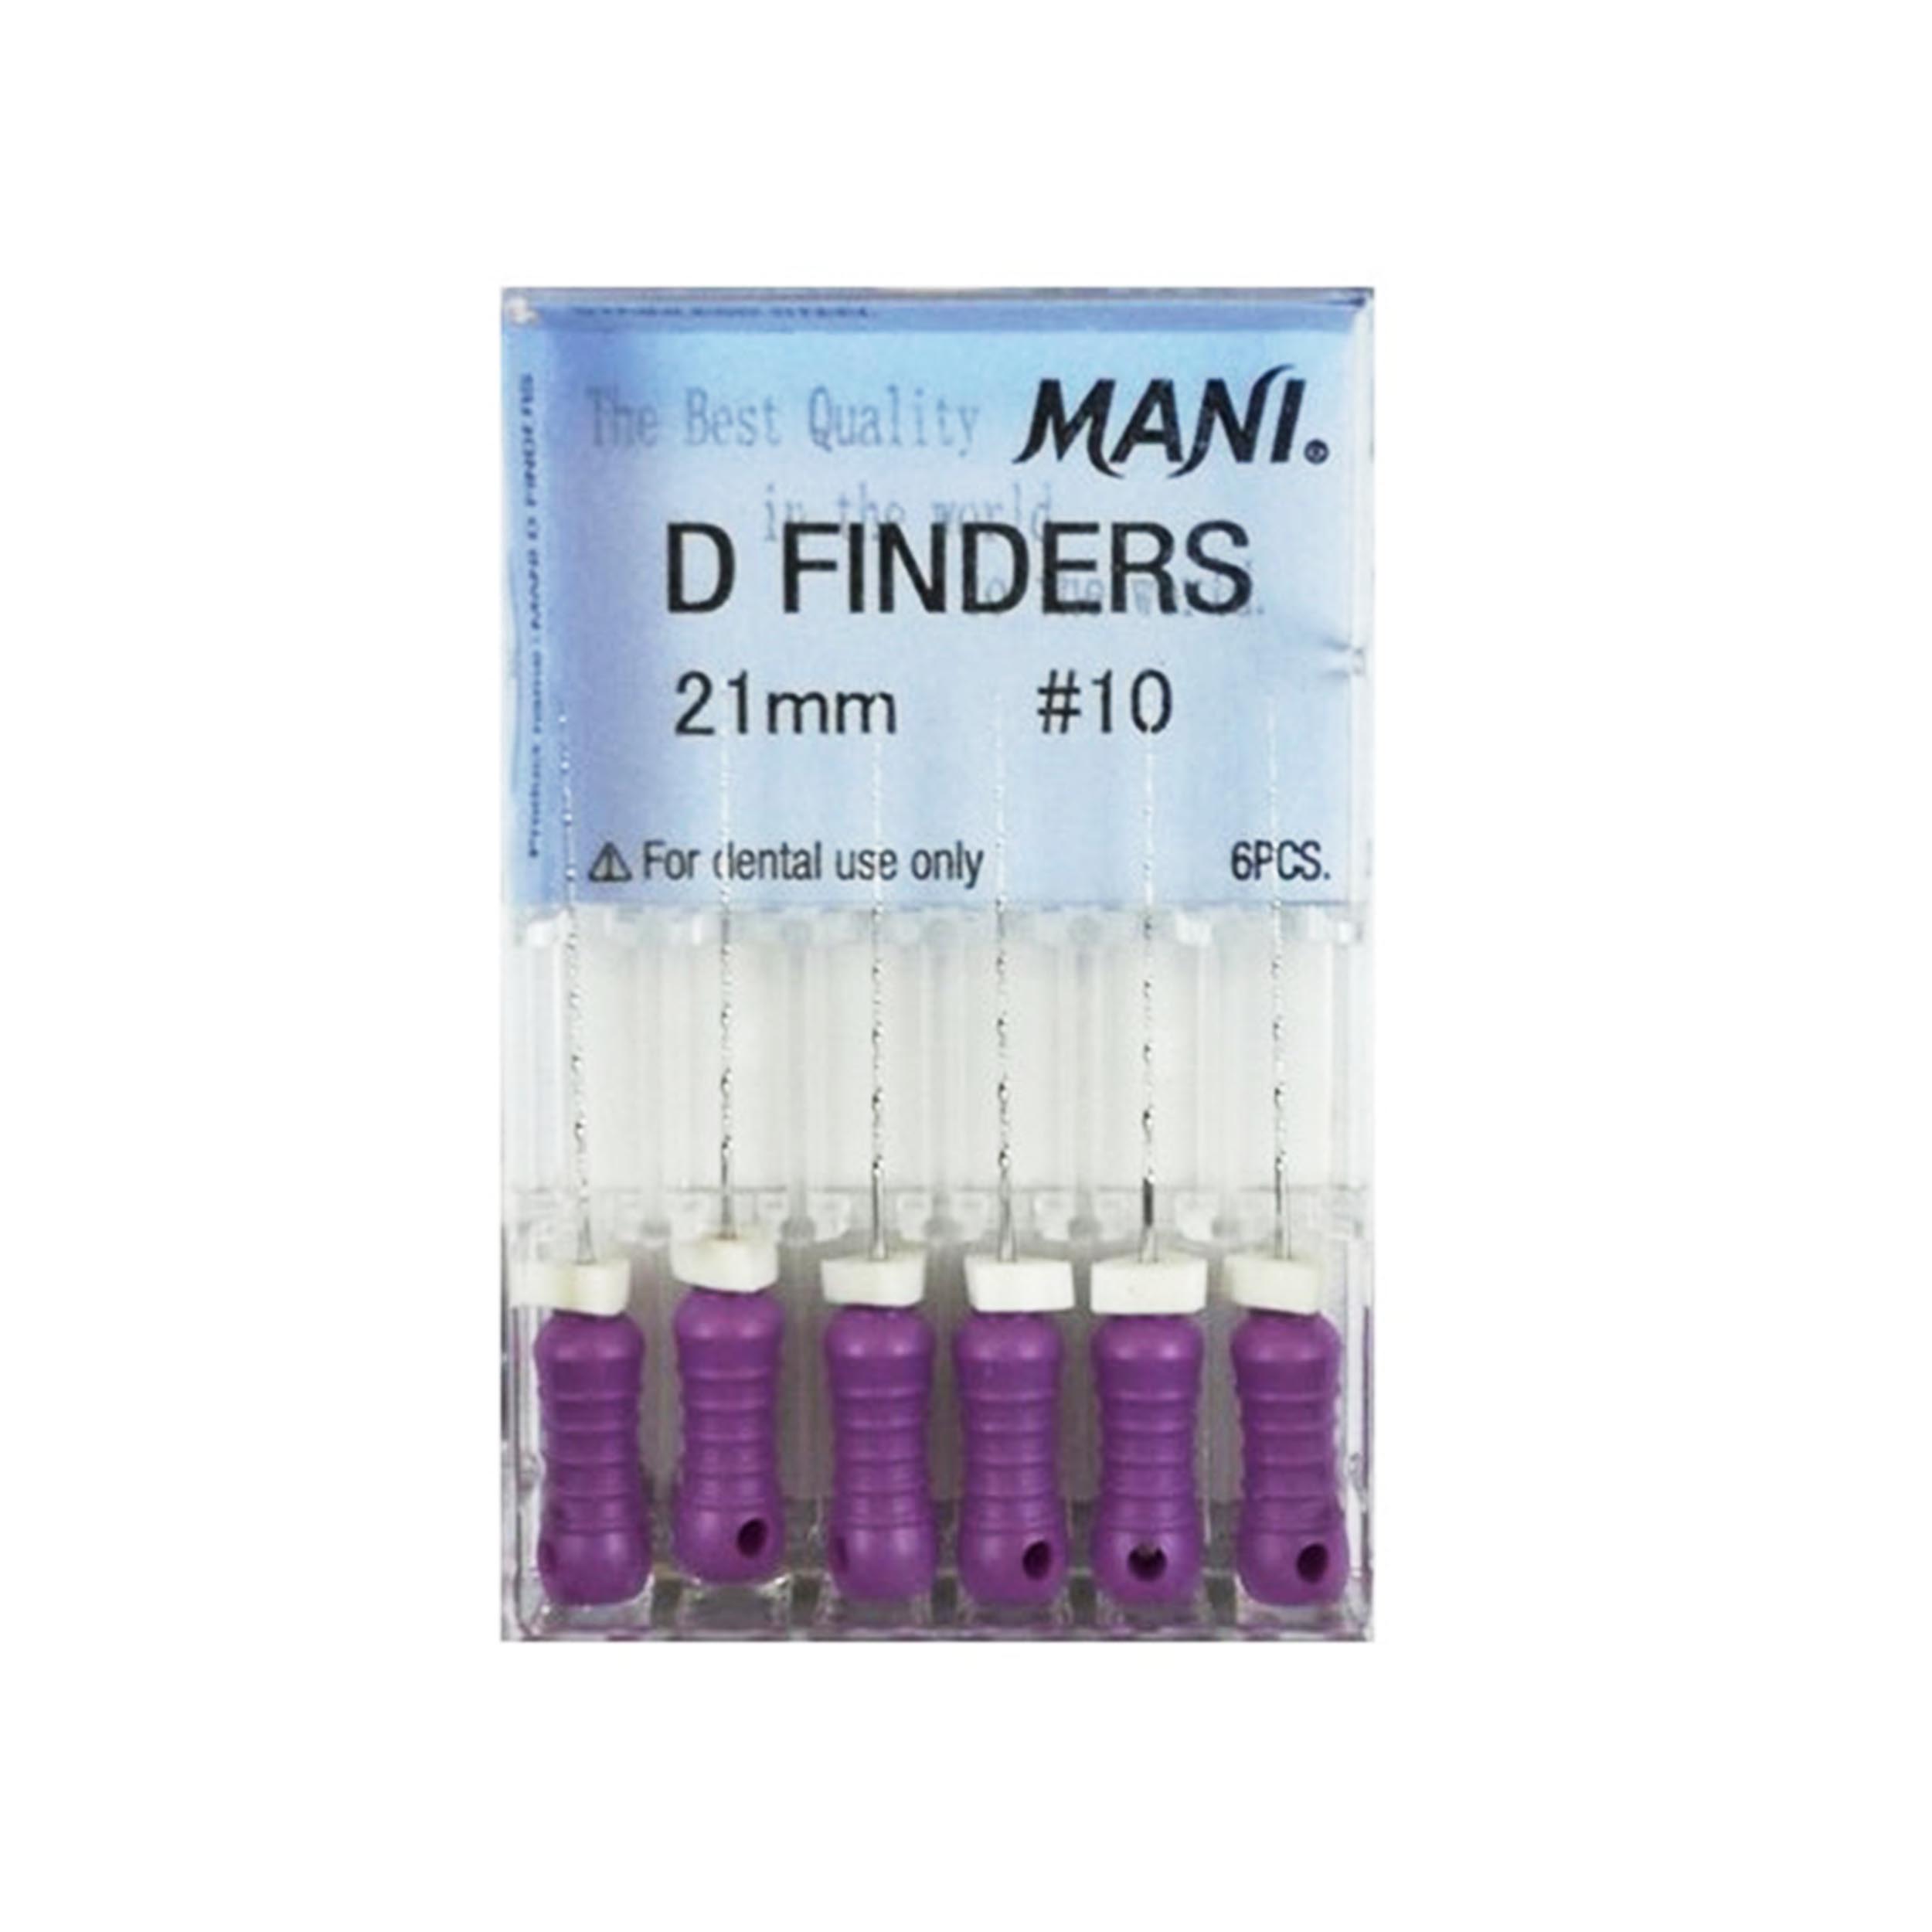 Mani D Finder Root Canal Files 12 (21mm)